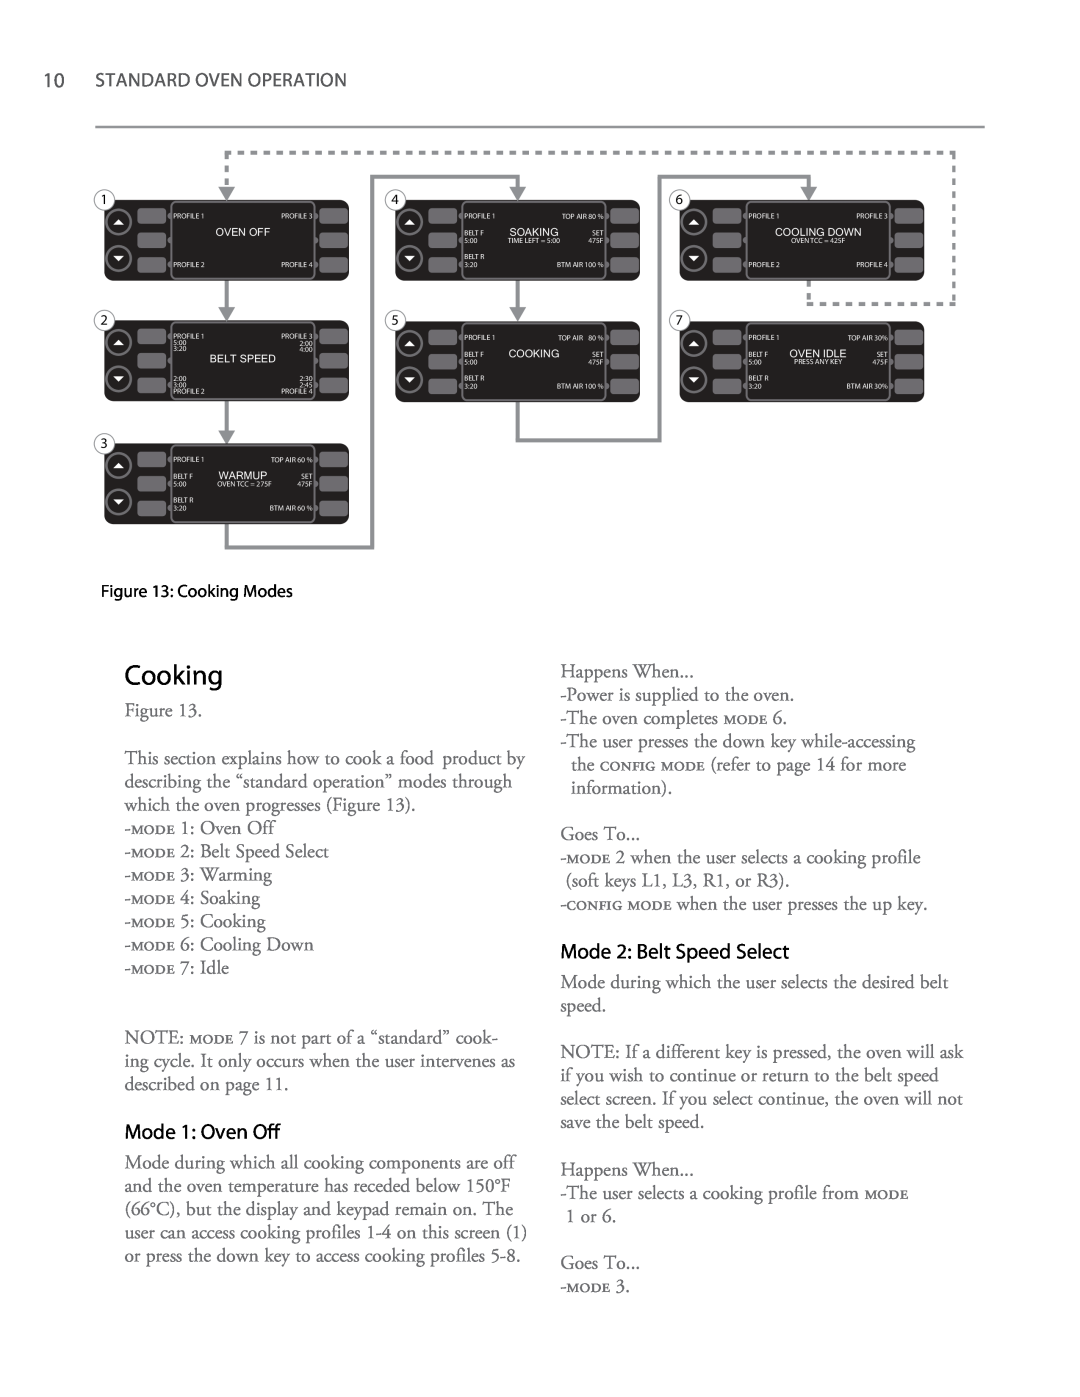 Turbo Chef Technologies 2620, 2020 owner manual Cooking, Mode 1 Oven Off, Mode 2 Belt Speed Select, Standard Oven Operation 